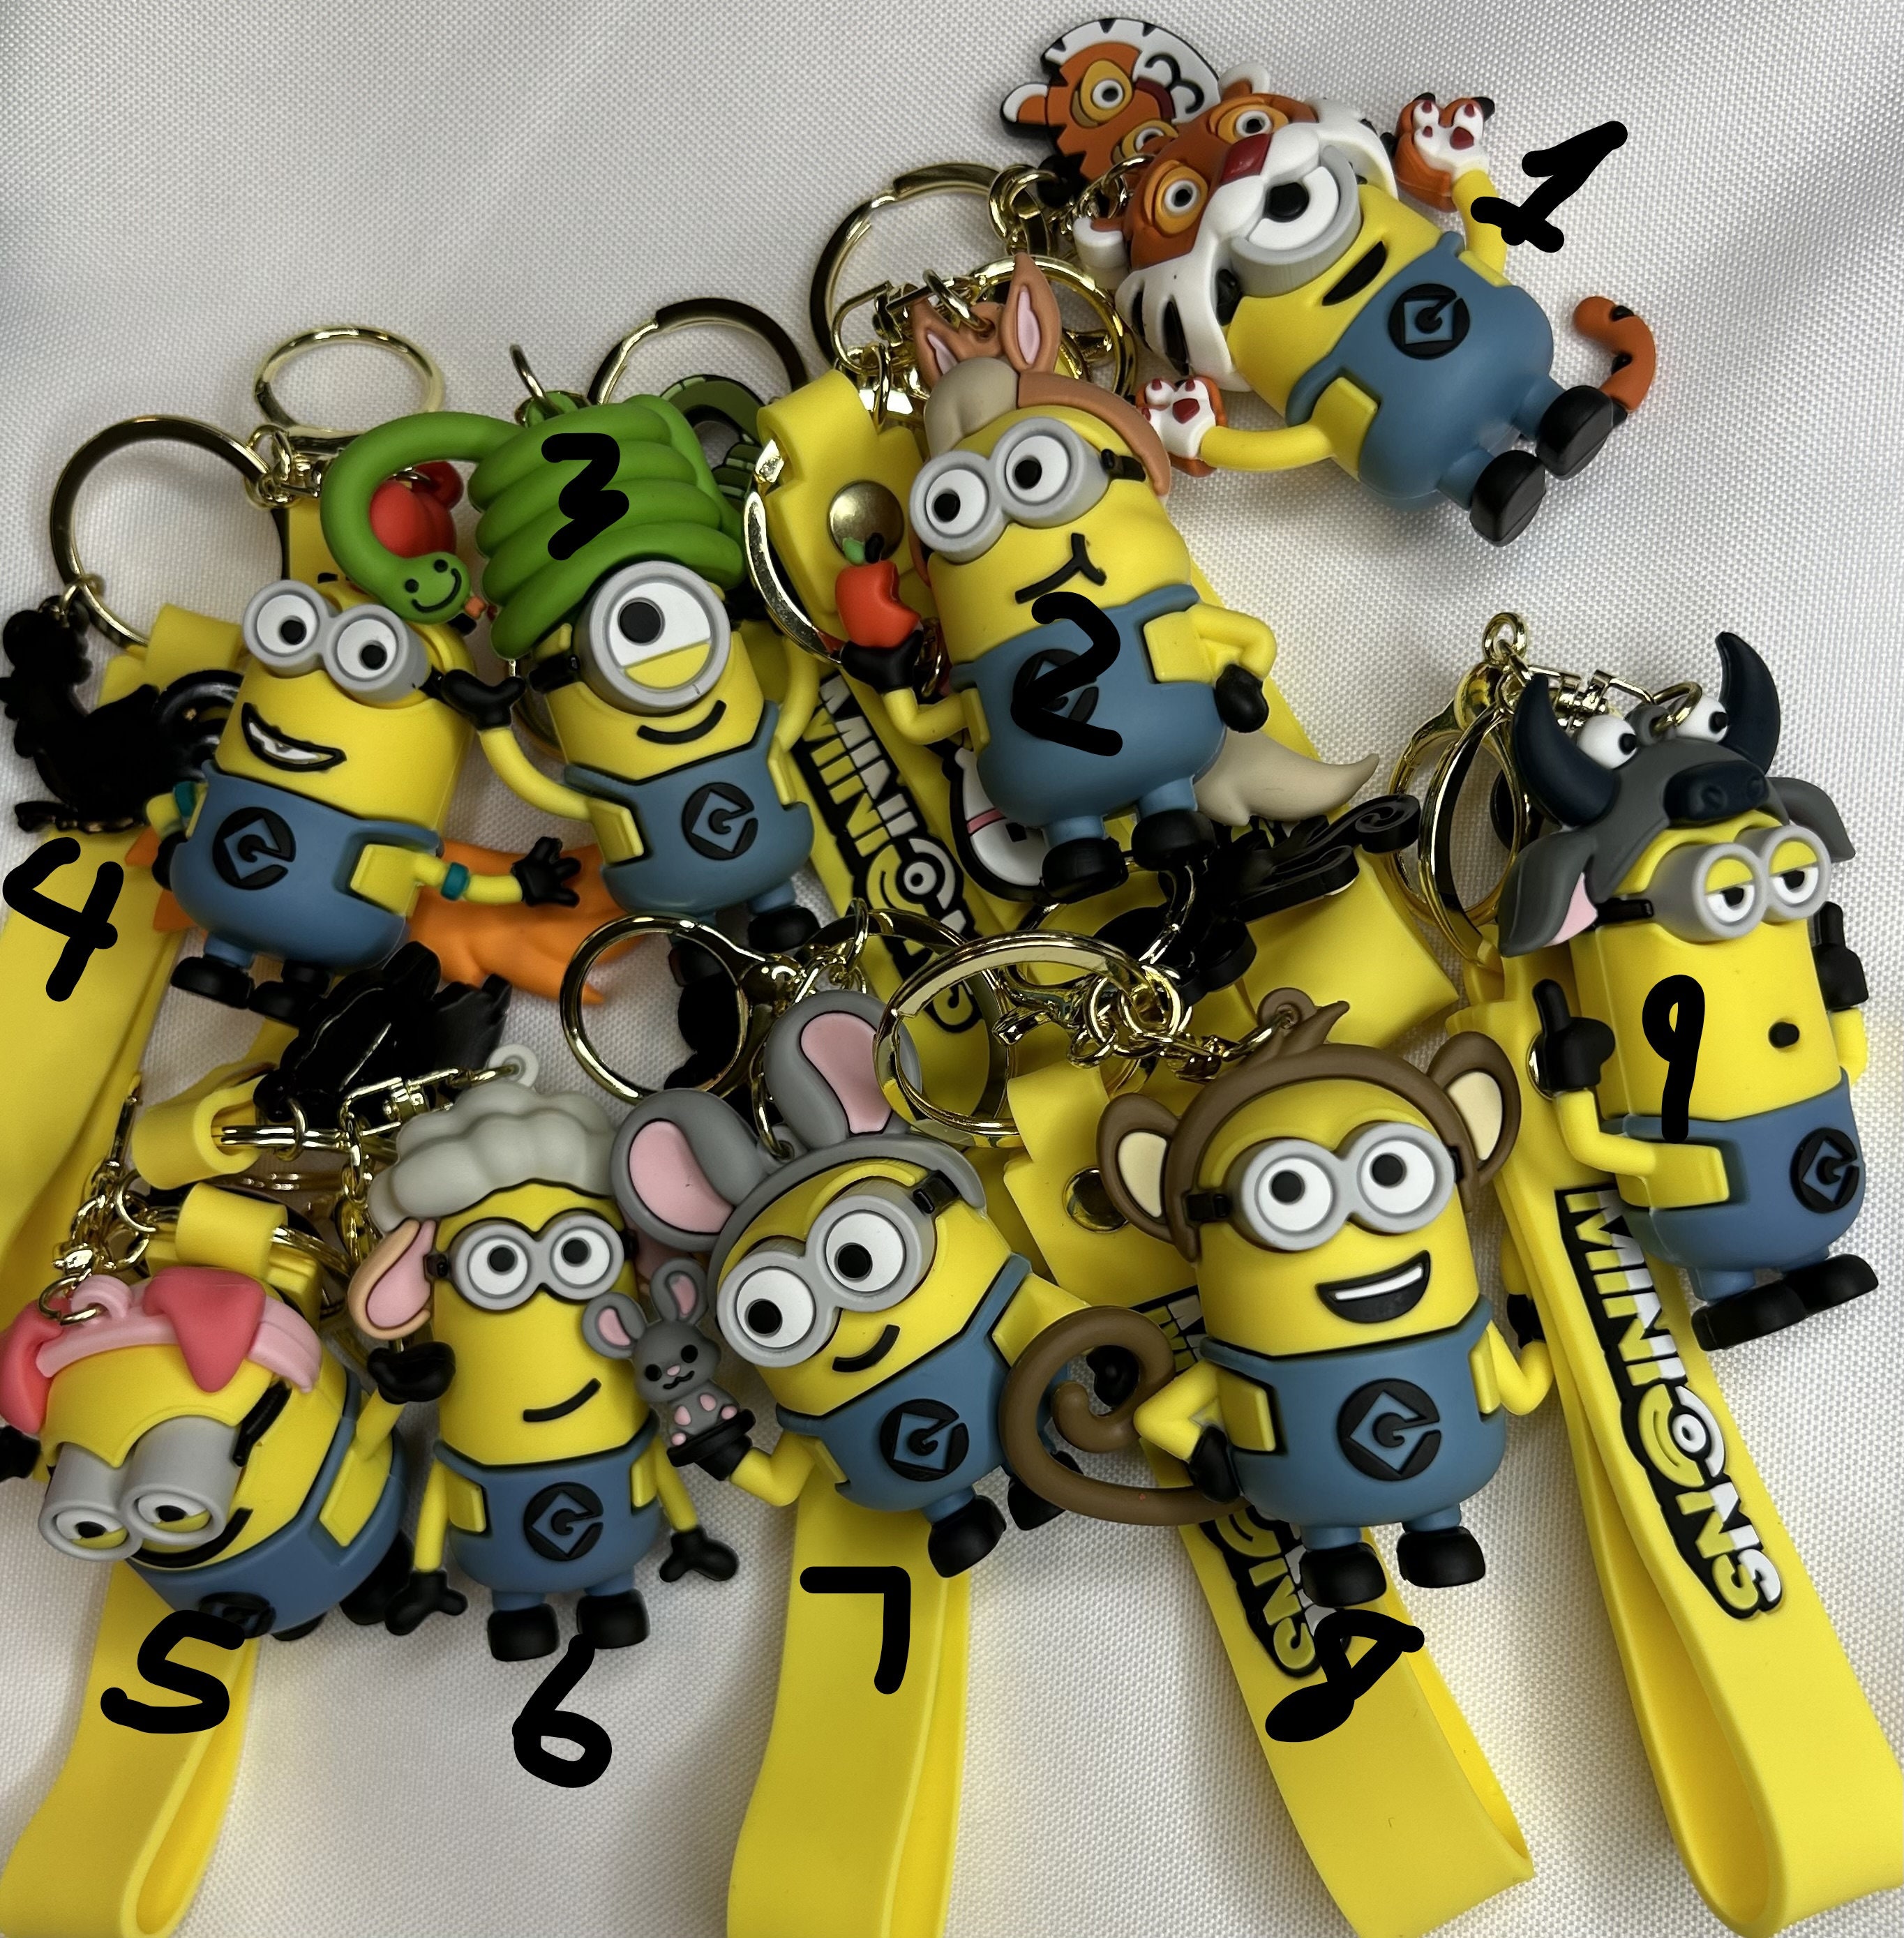 Reworked Minion Toy Backpack Minion Toy Rucksack Reworked 